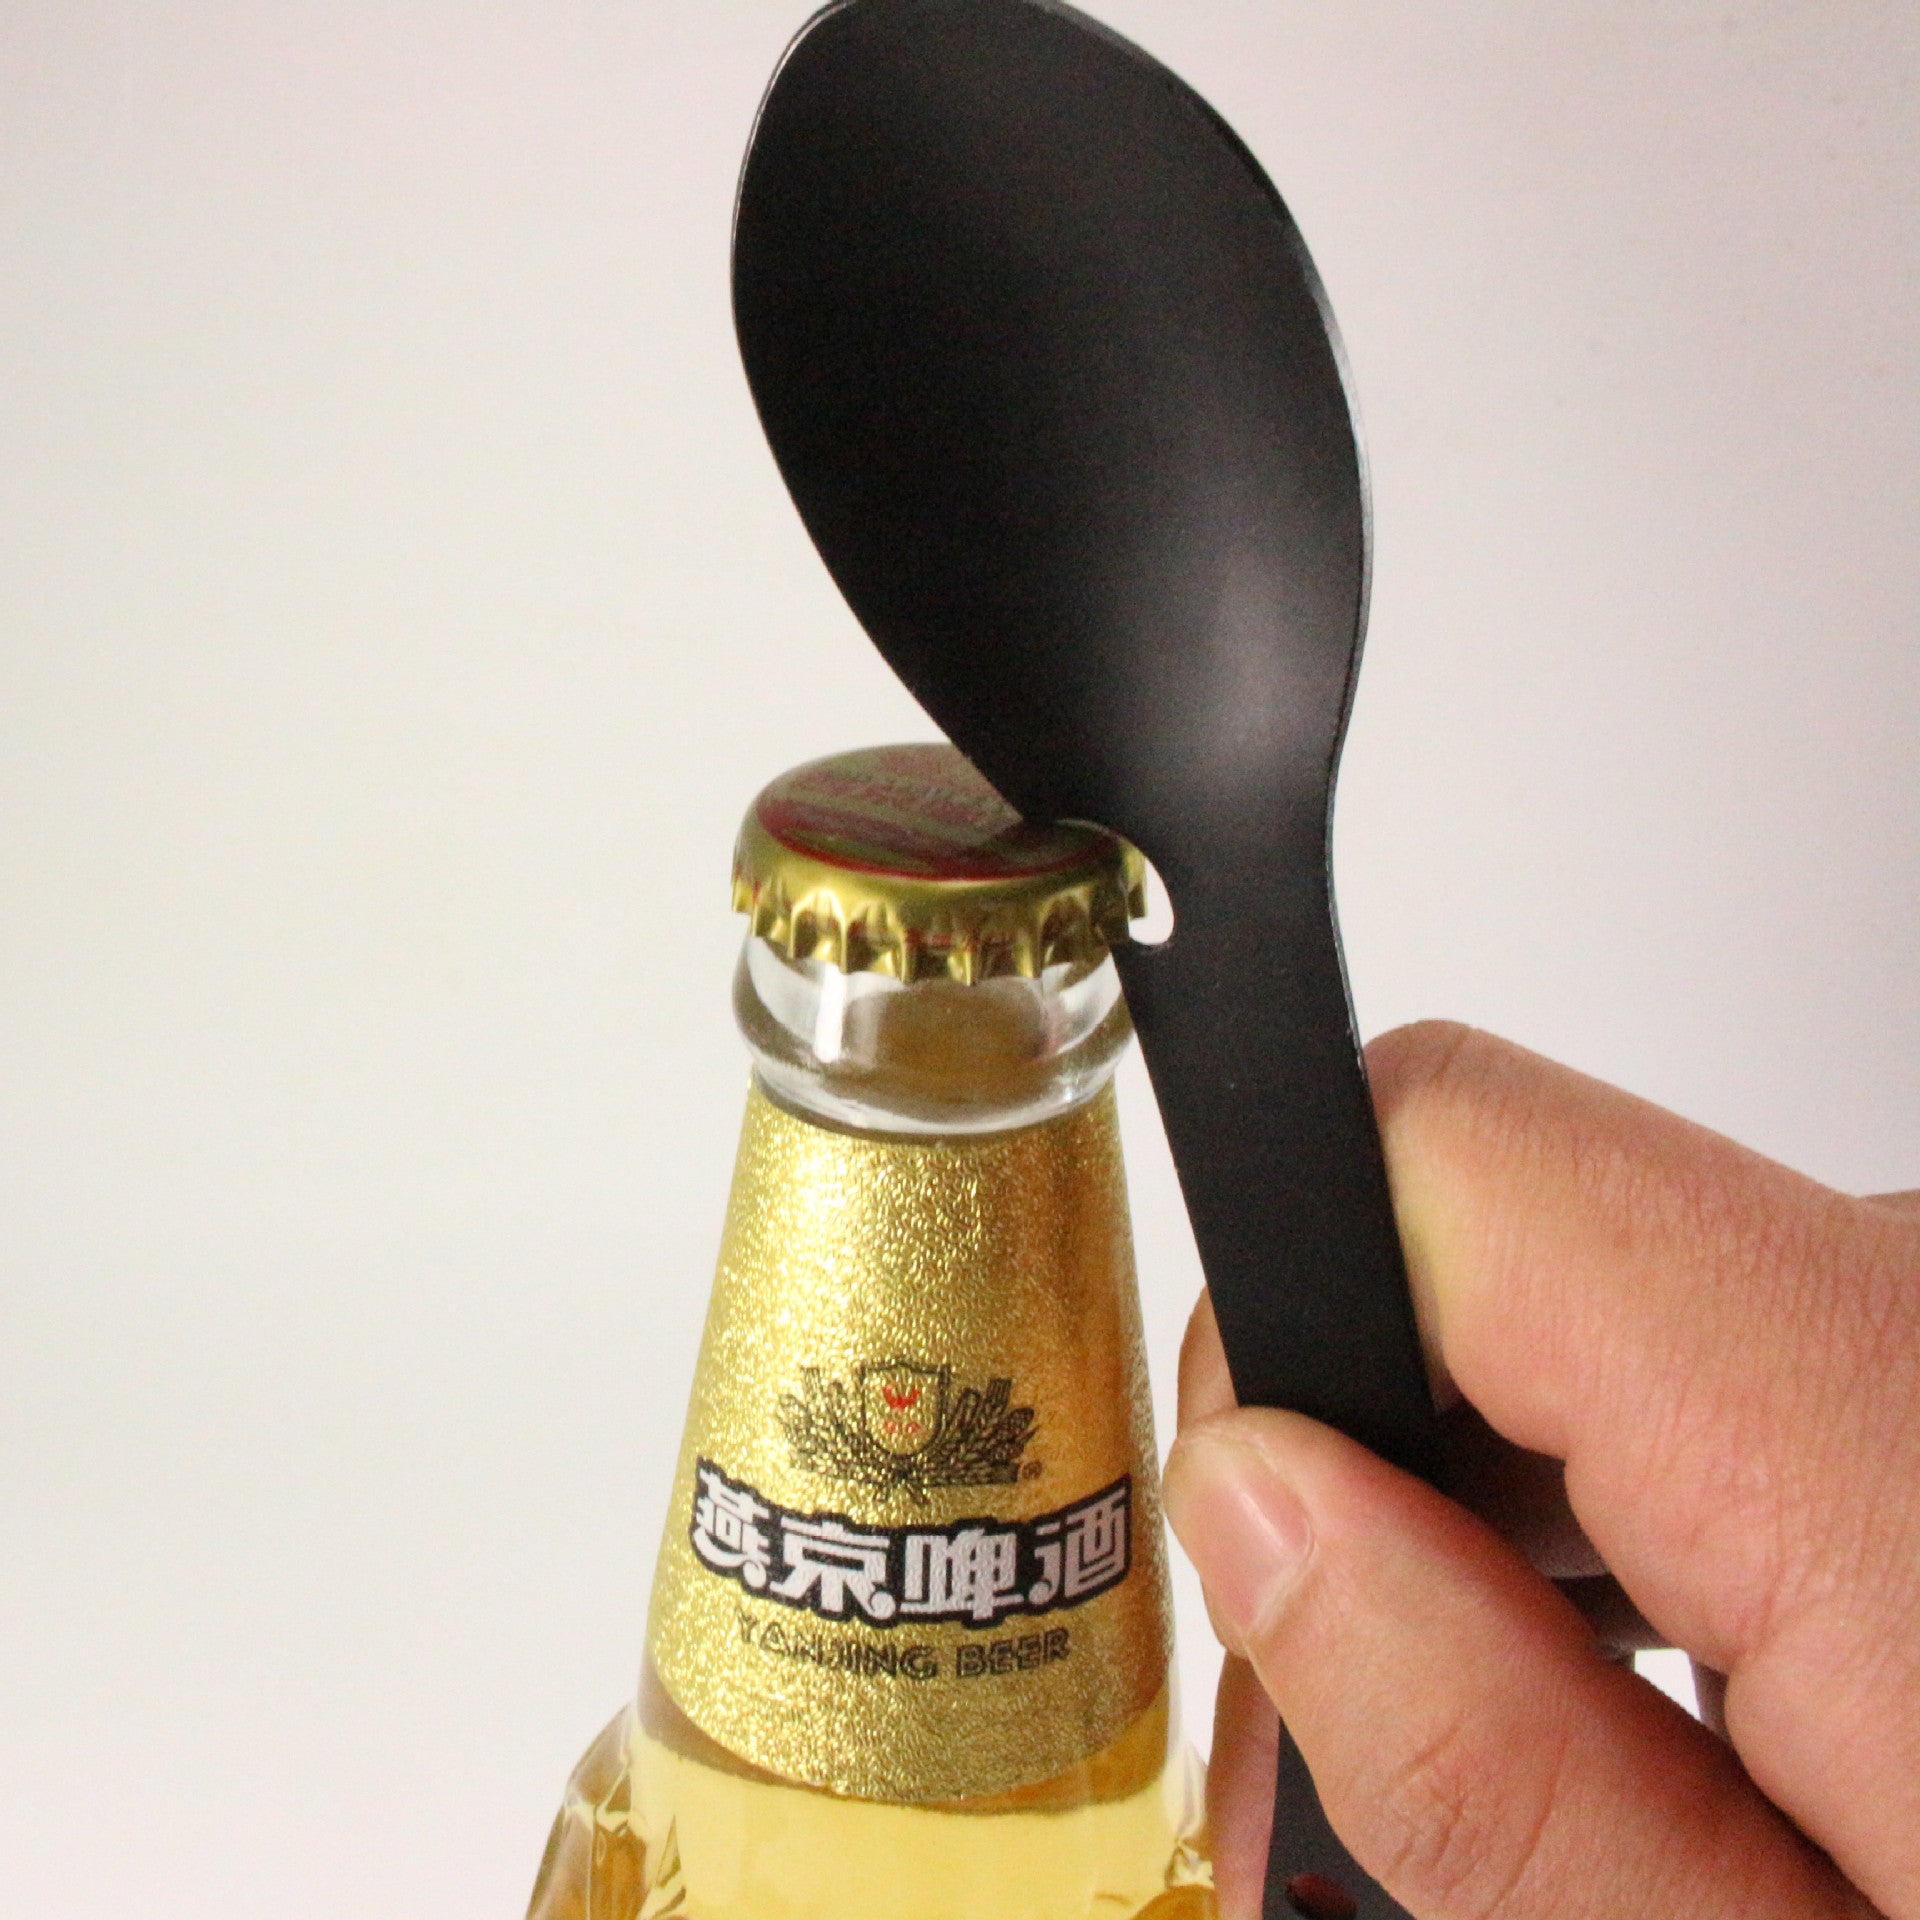 The spork an be used as a spoon, fork, knife and even as a bottle opener. Save space on your back pack when outdoor eating. 